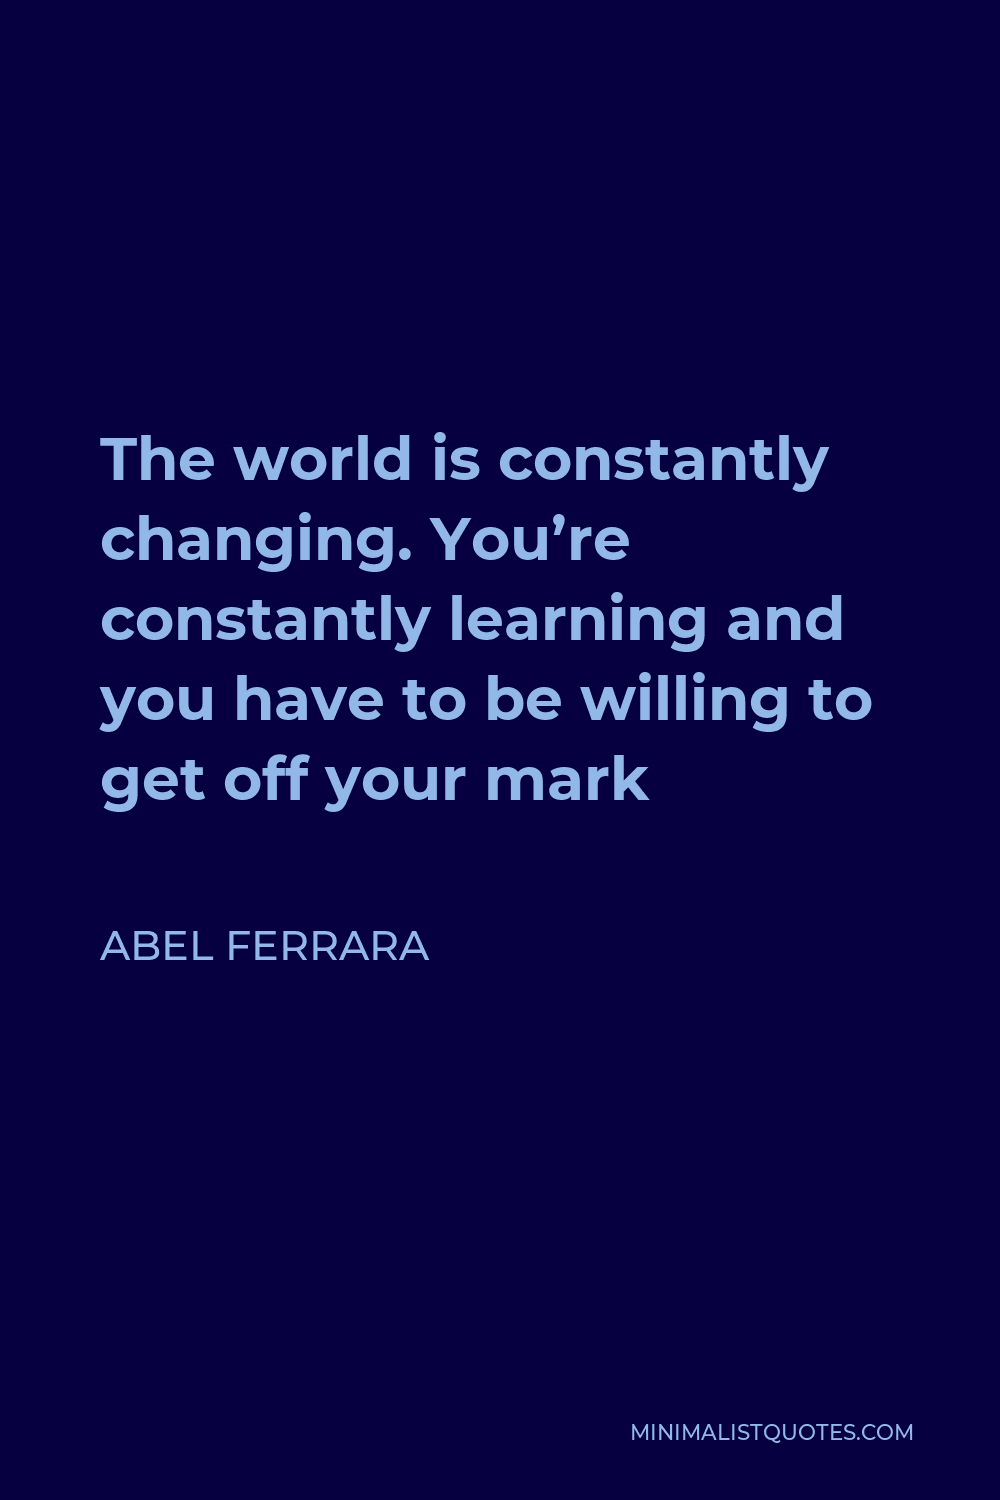 Abel Ferrara Quote - The world is constantly changing. You’re constantly learning and you have to be willing to get off your mark